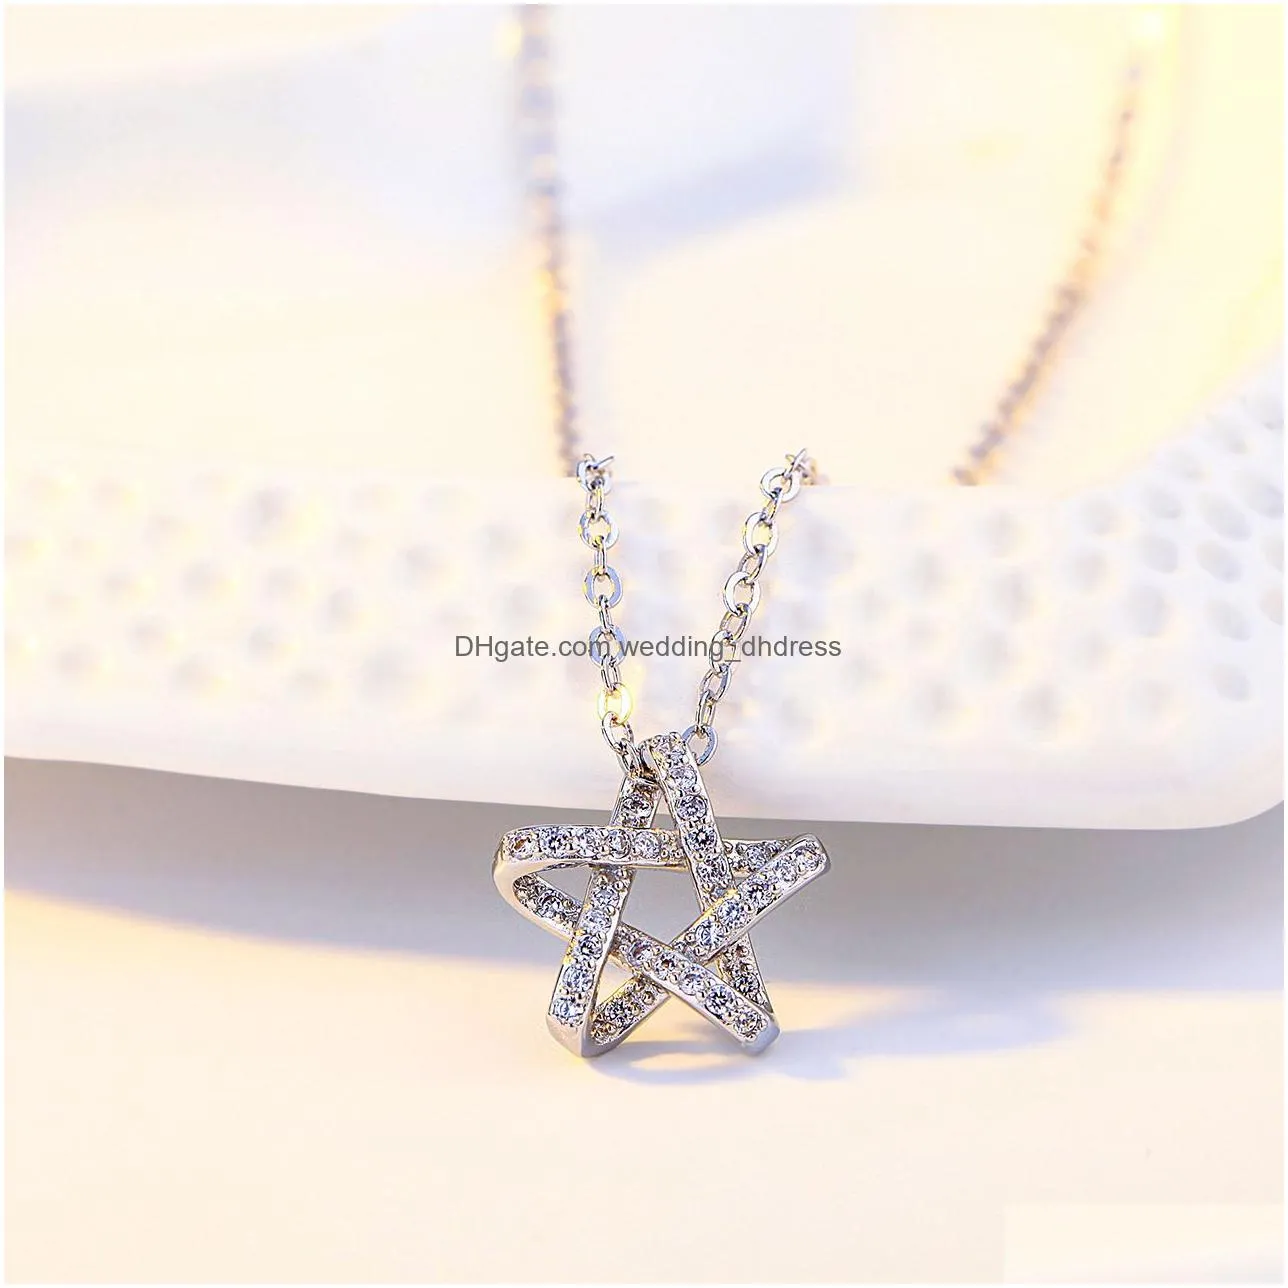 Other Wedding Favors Rhinestone Star Pendant Necklace White Gold Luxury Design Women Party Jewelry For Girl Gift Fashion Choker Neck Dhlak